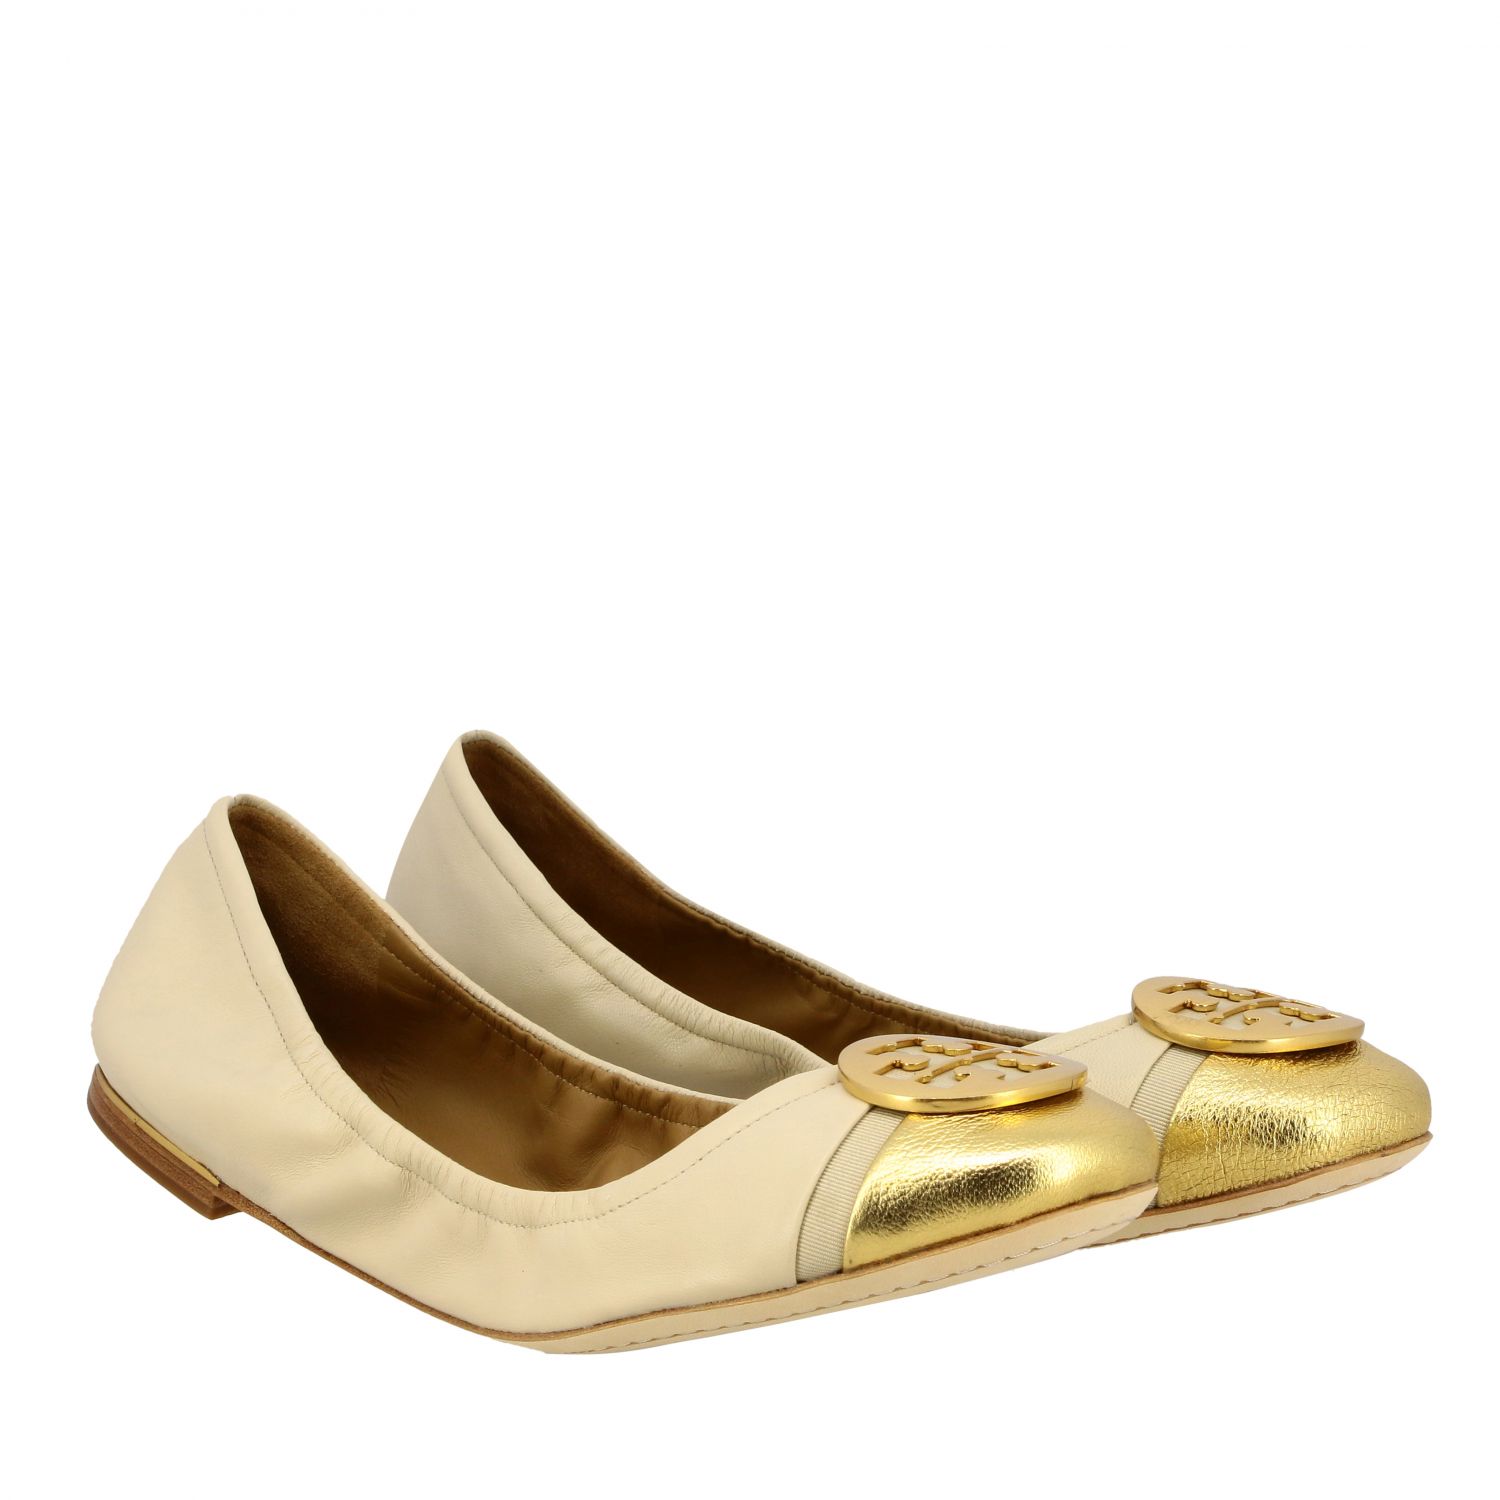 TORY BURCH: Minnie ballet flat in nappa leather with emblem - Beige | Tory  Burch ballet flats 63177 online on 